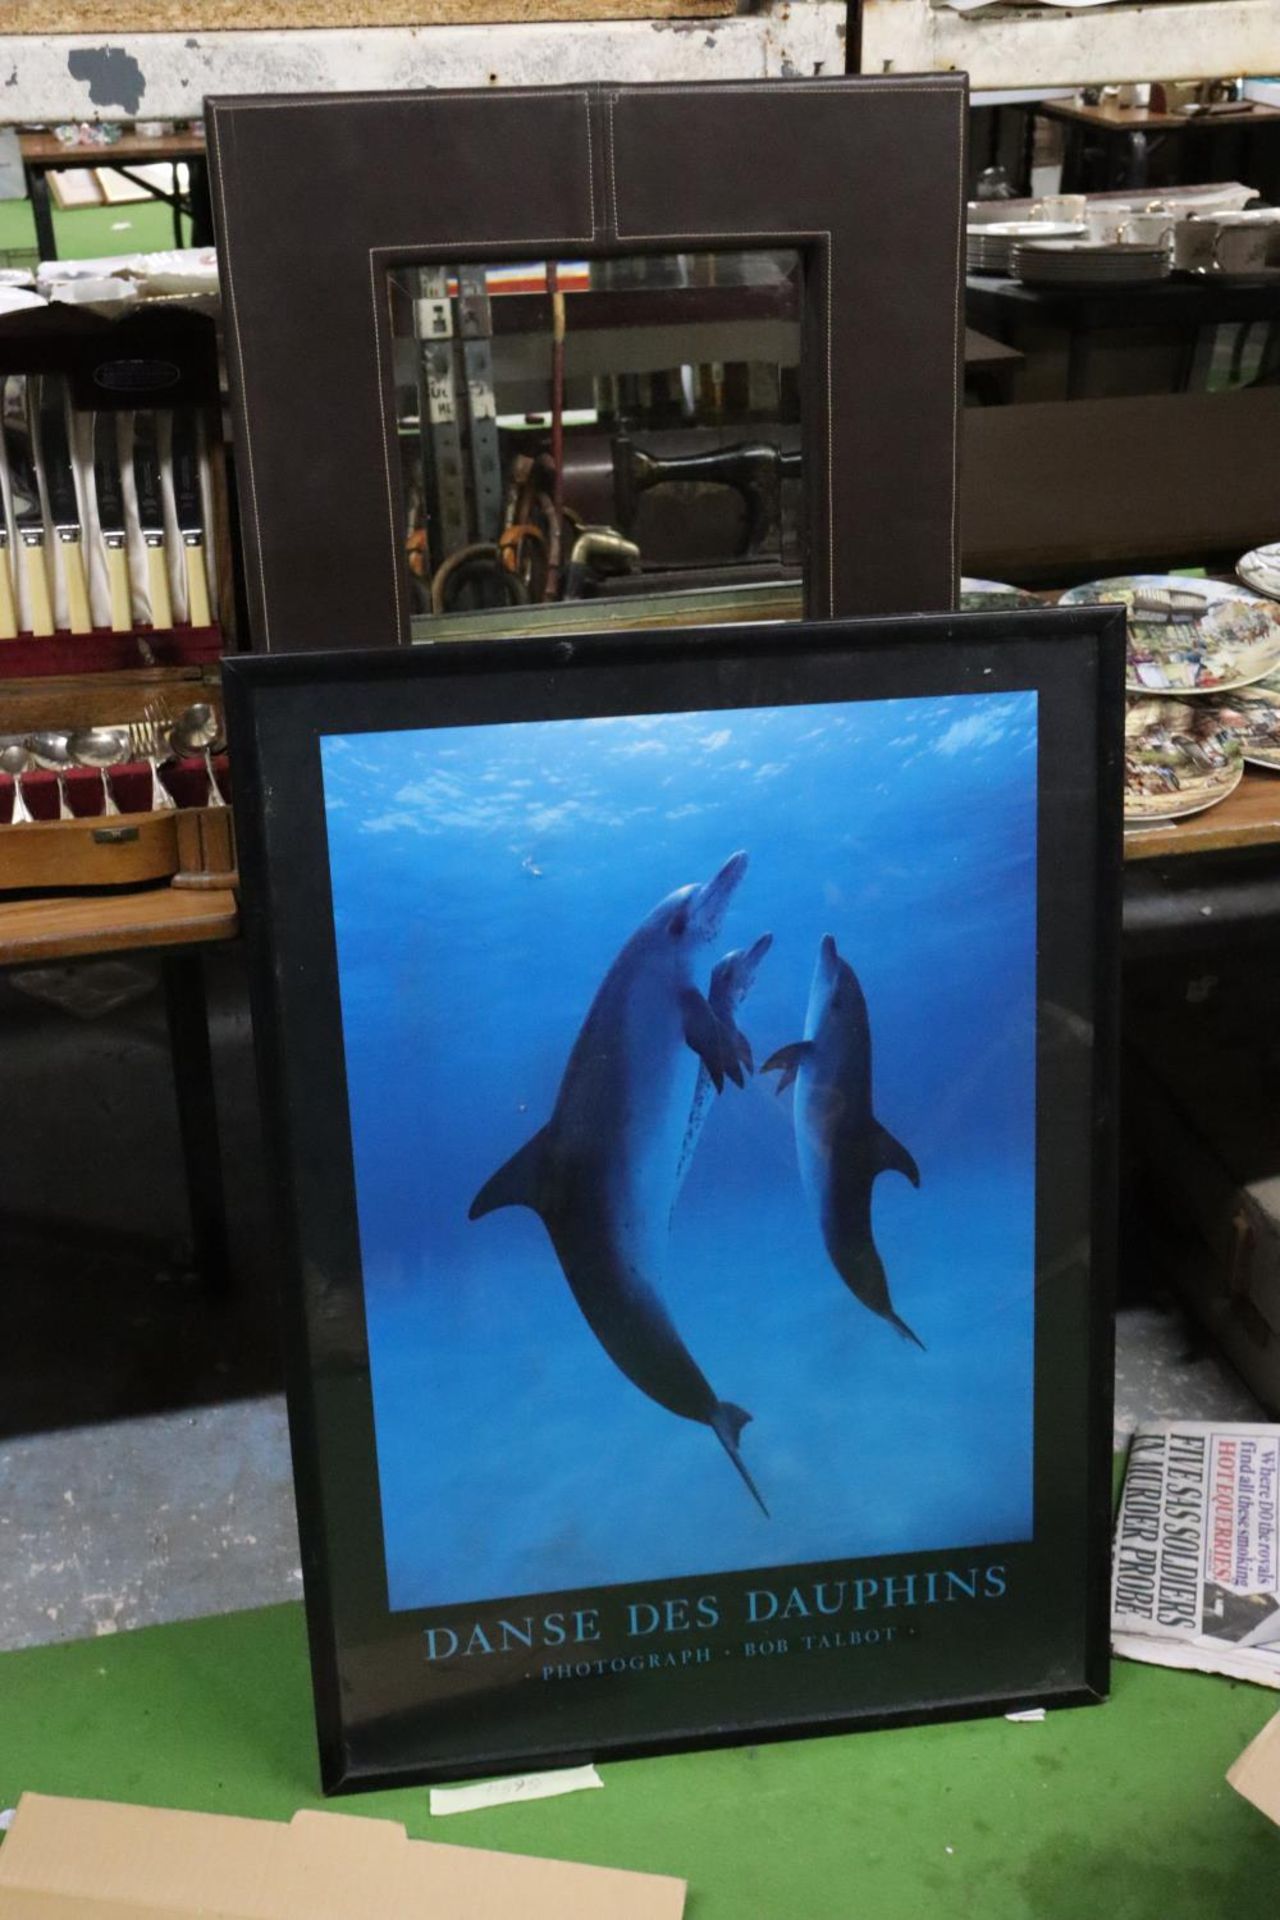 A LARGE MODERN MIRROR AND A FRAMED PRINT OF A DOLPHIN